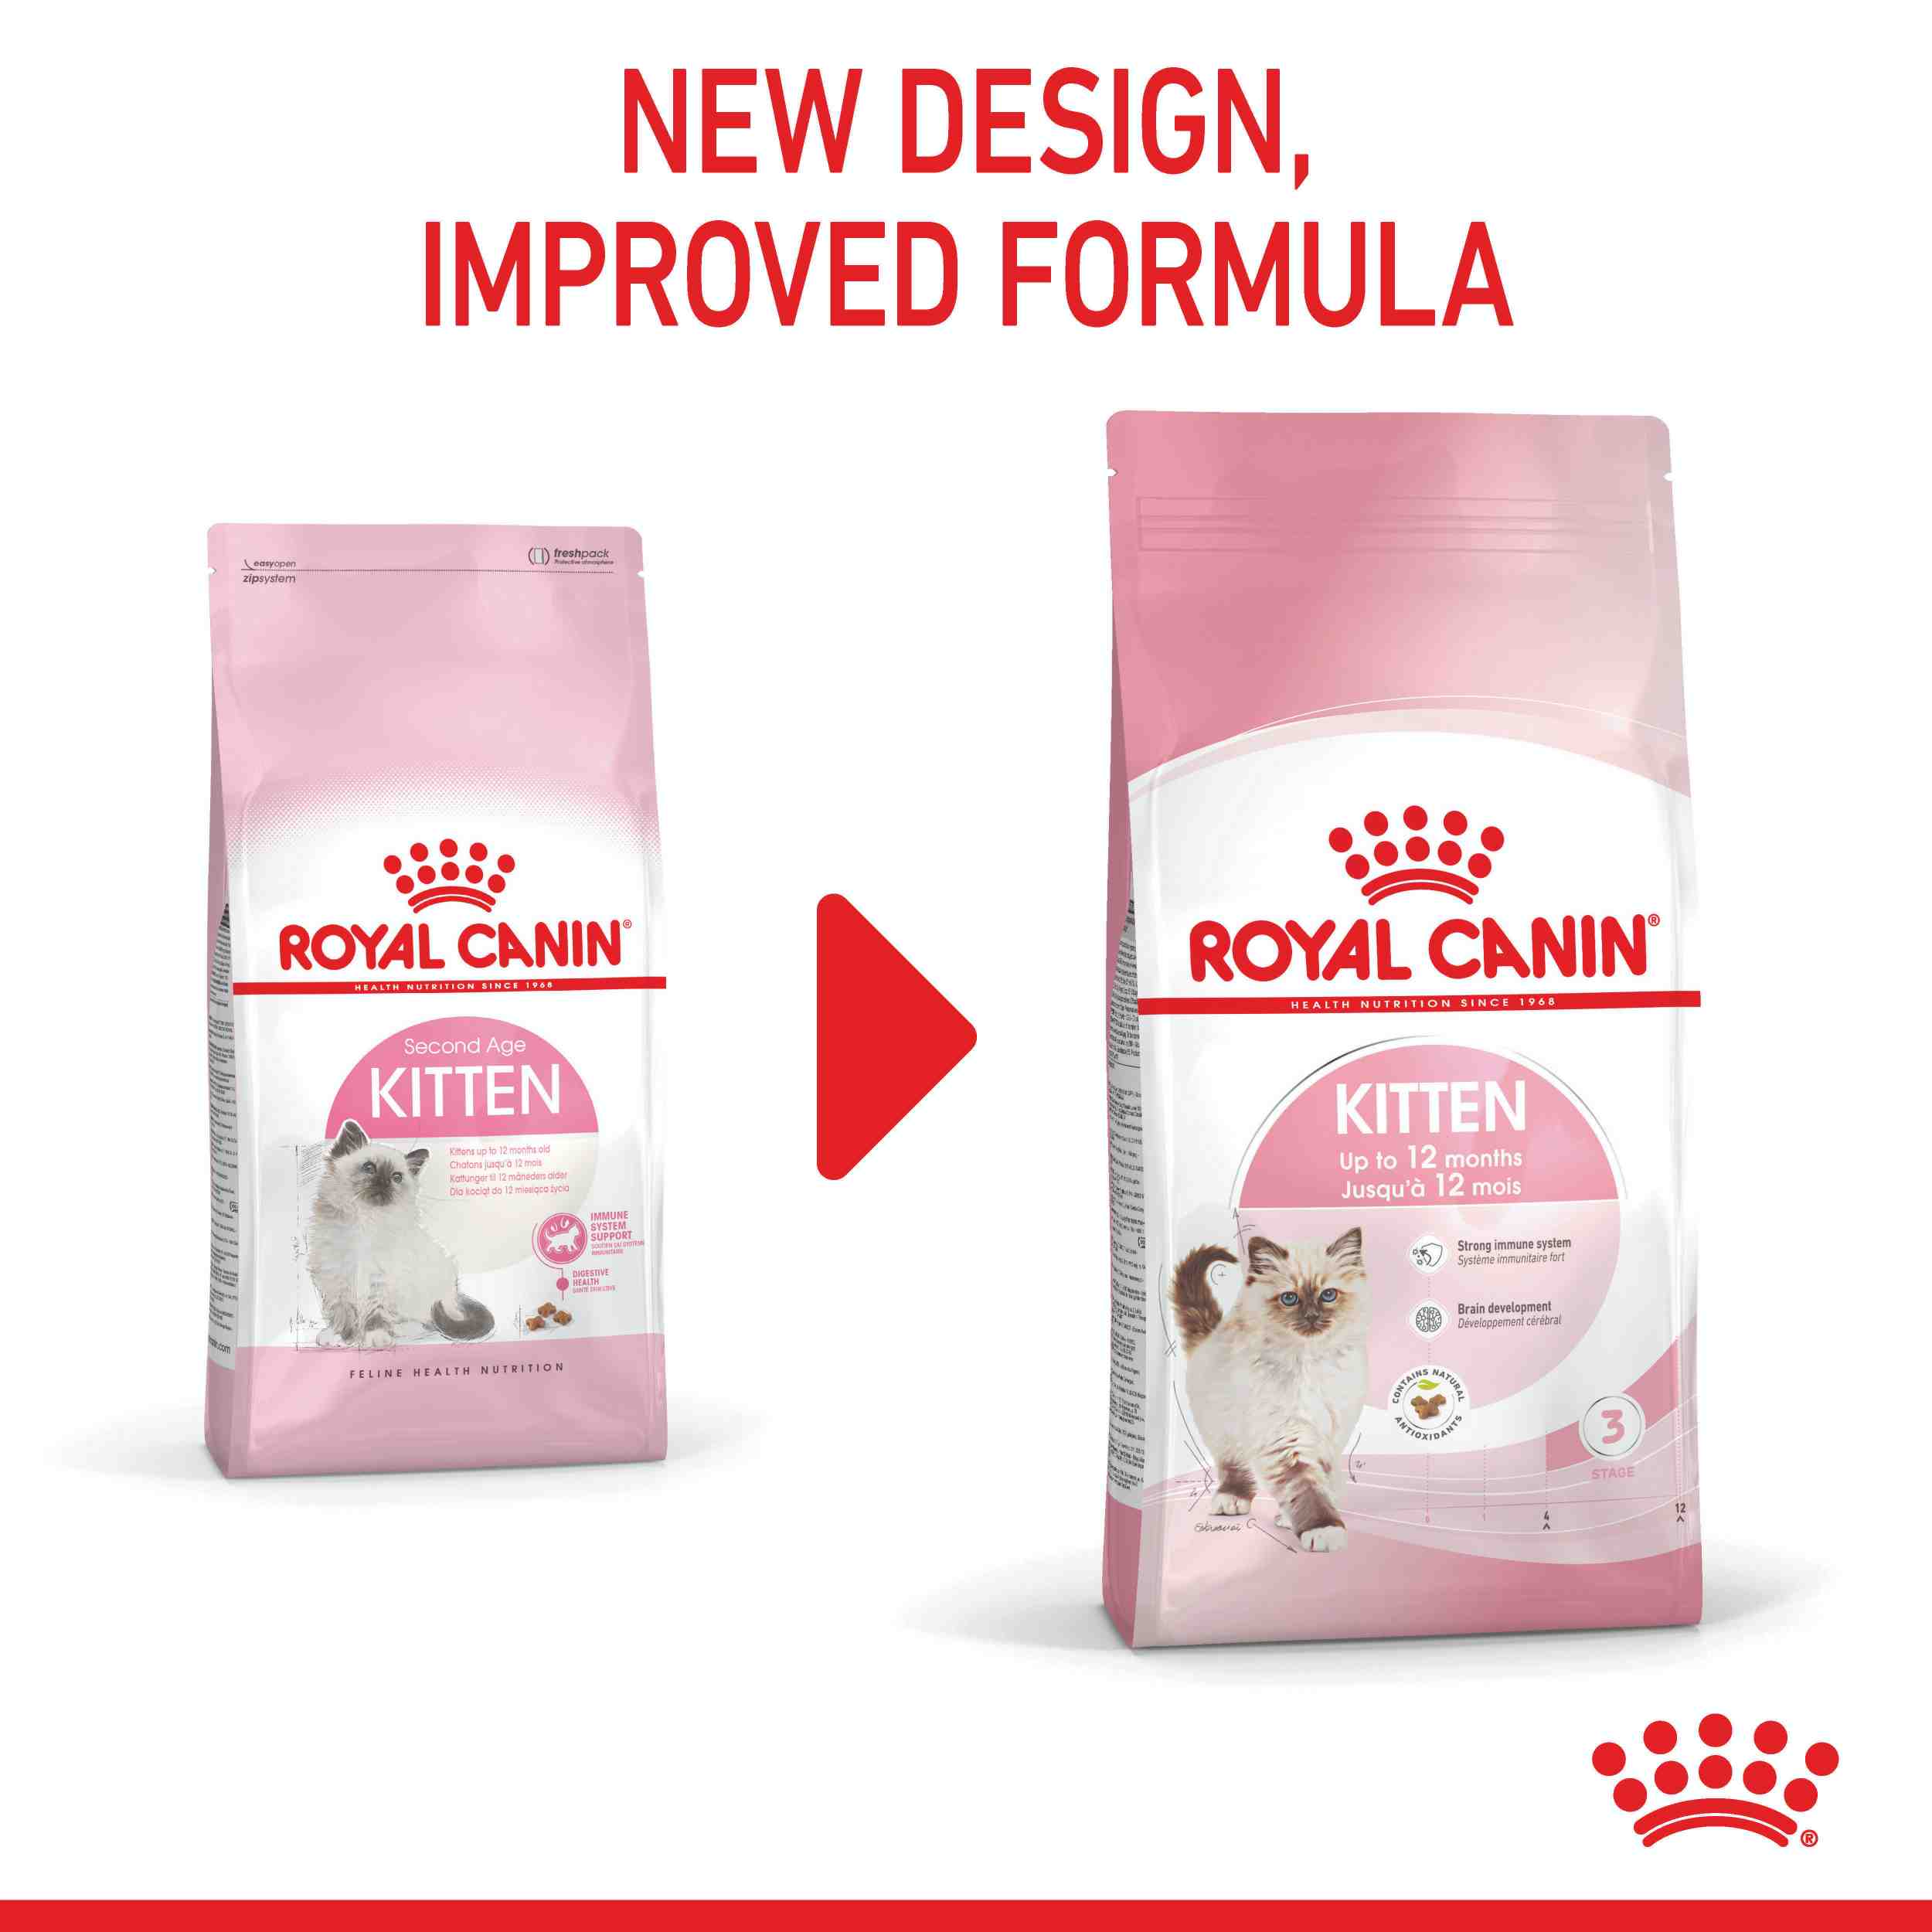 Puur Overredend pad Royal Canin Kitten Dry Cat Food | PETstock